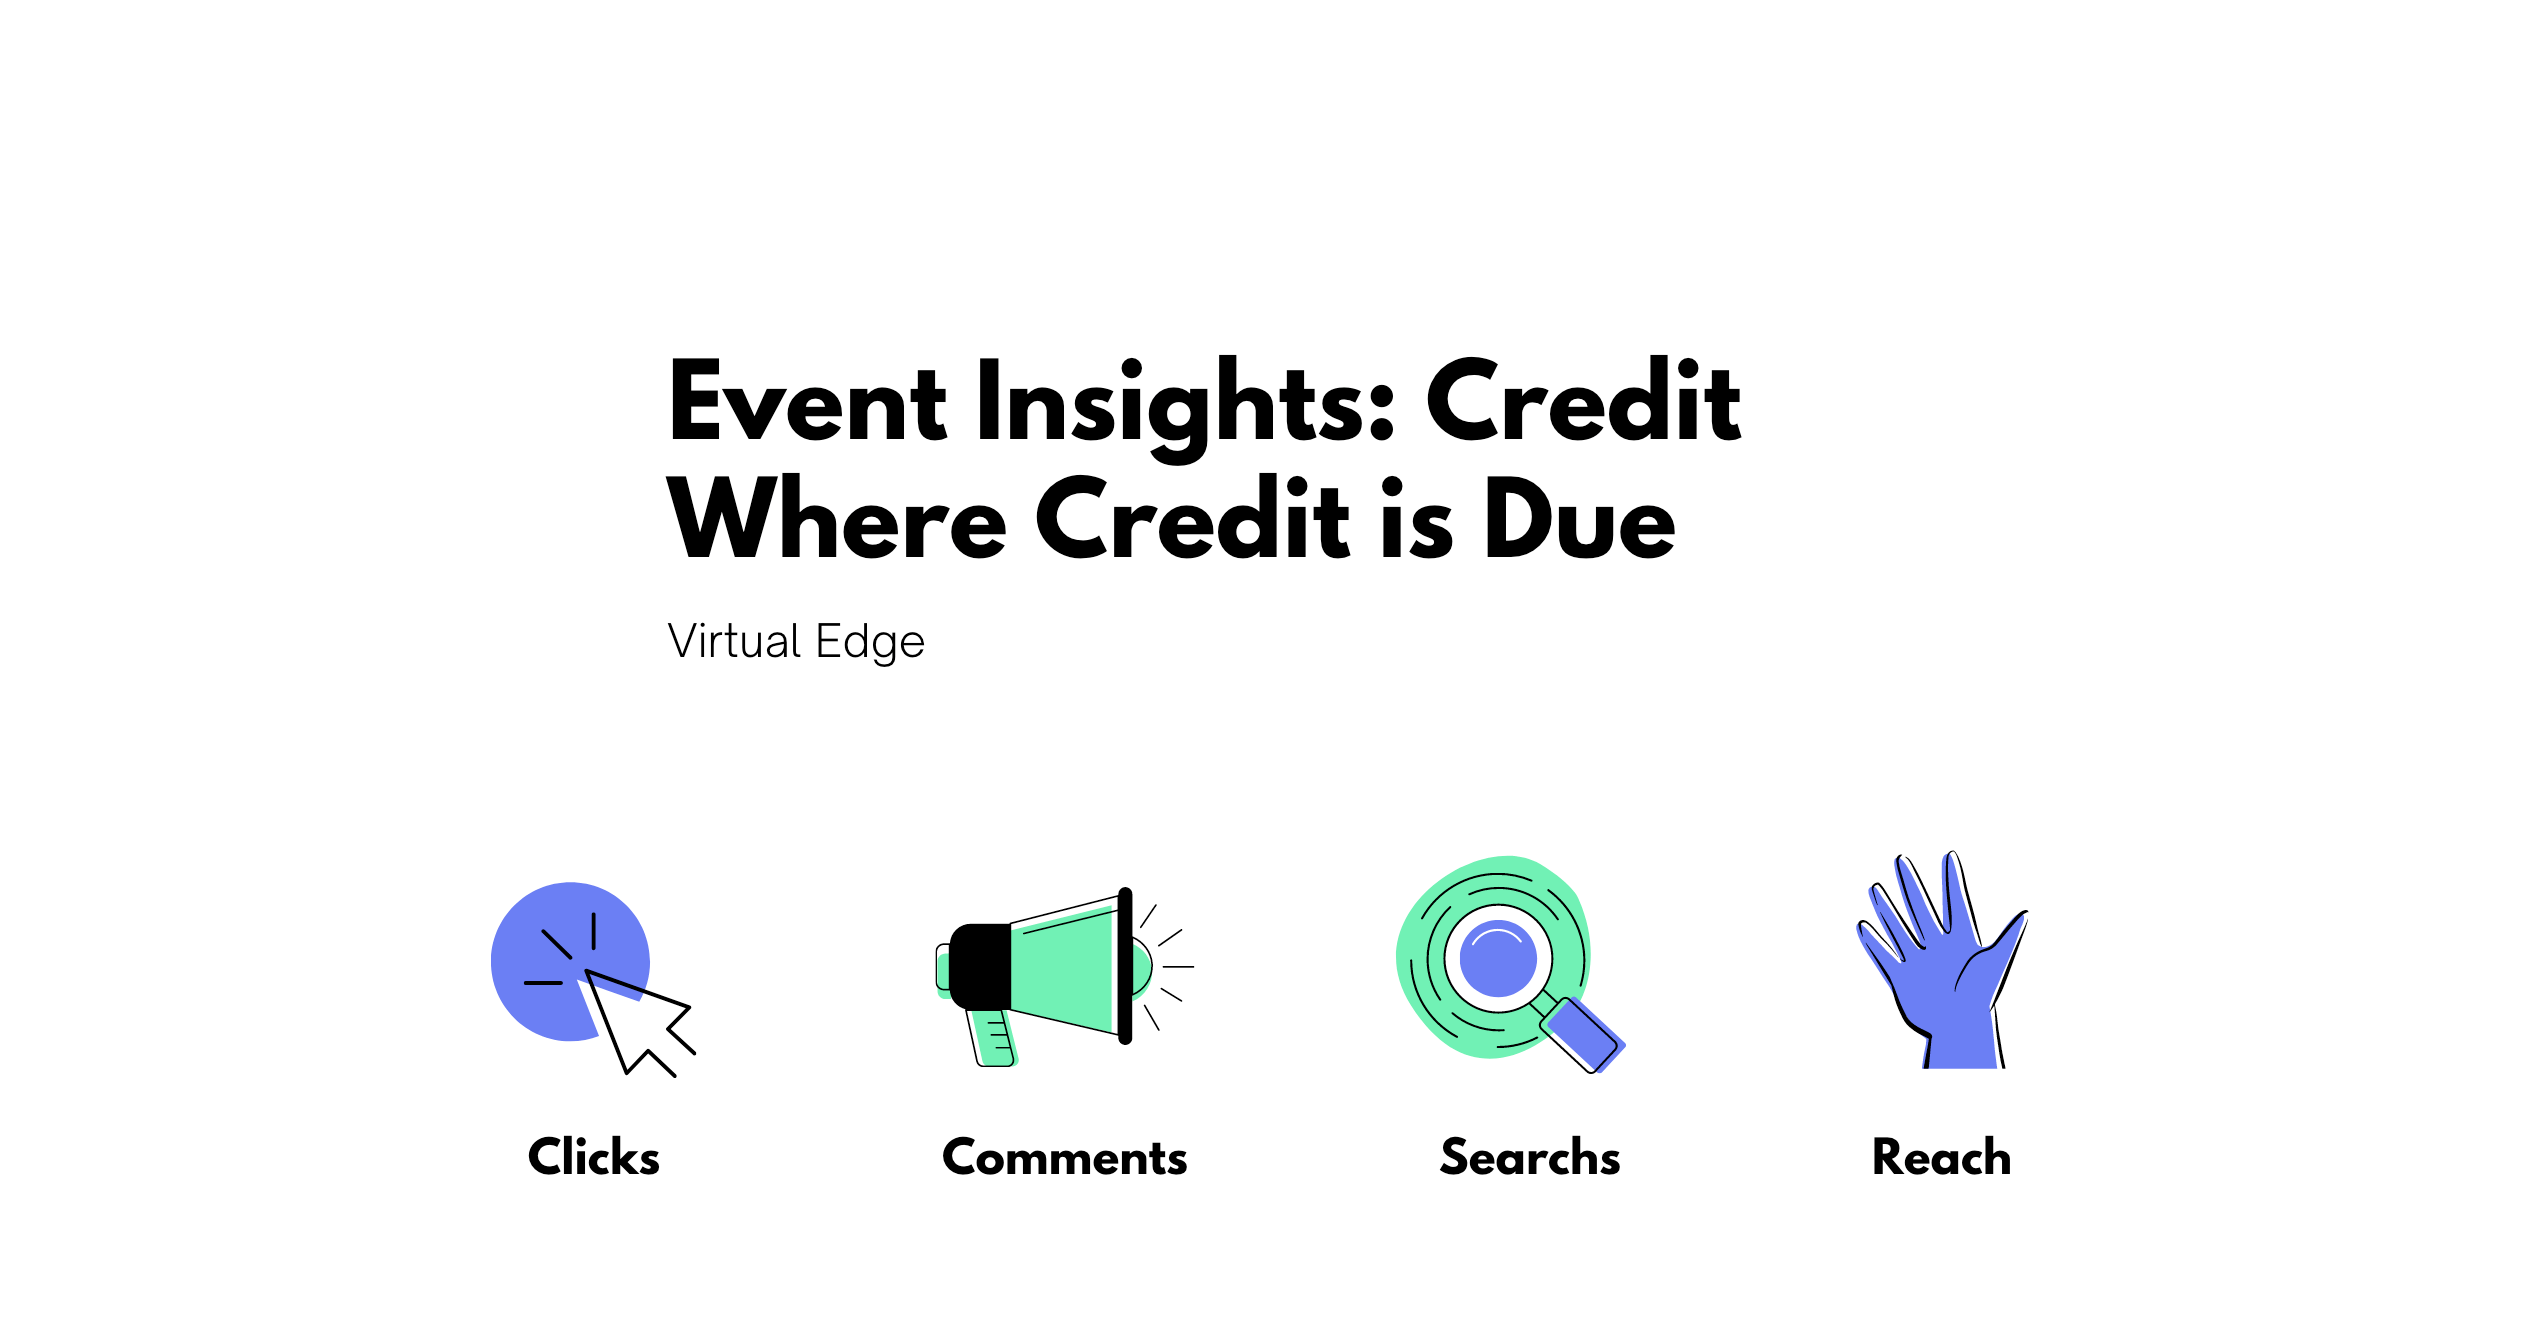 Event Insights: Credit Where Credit is Due